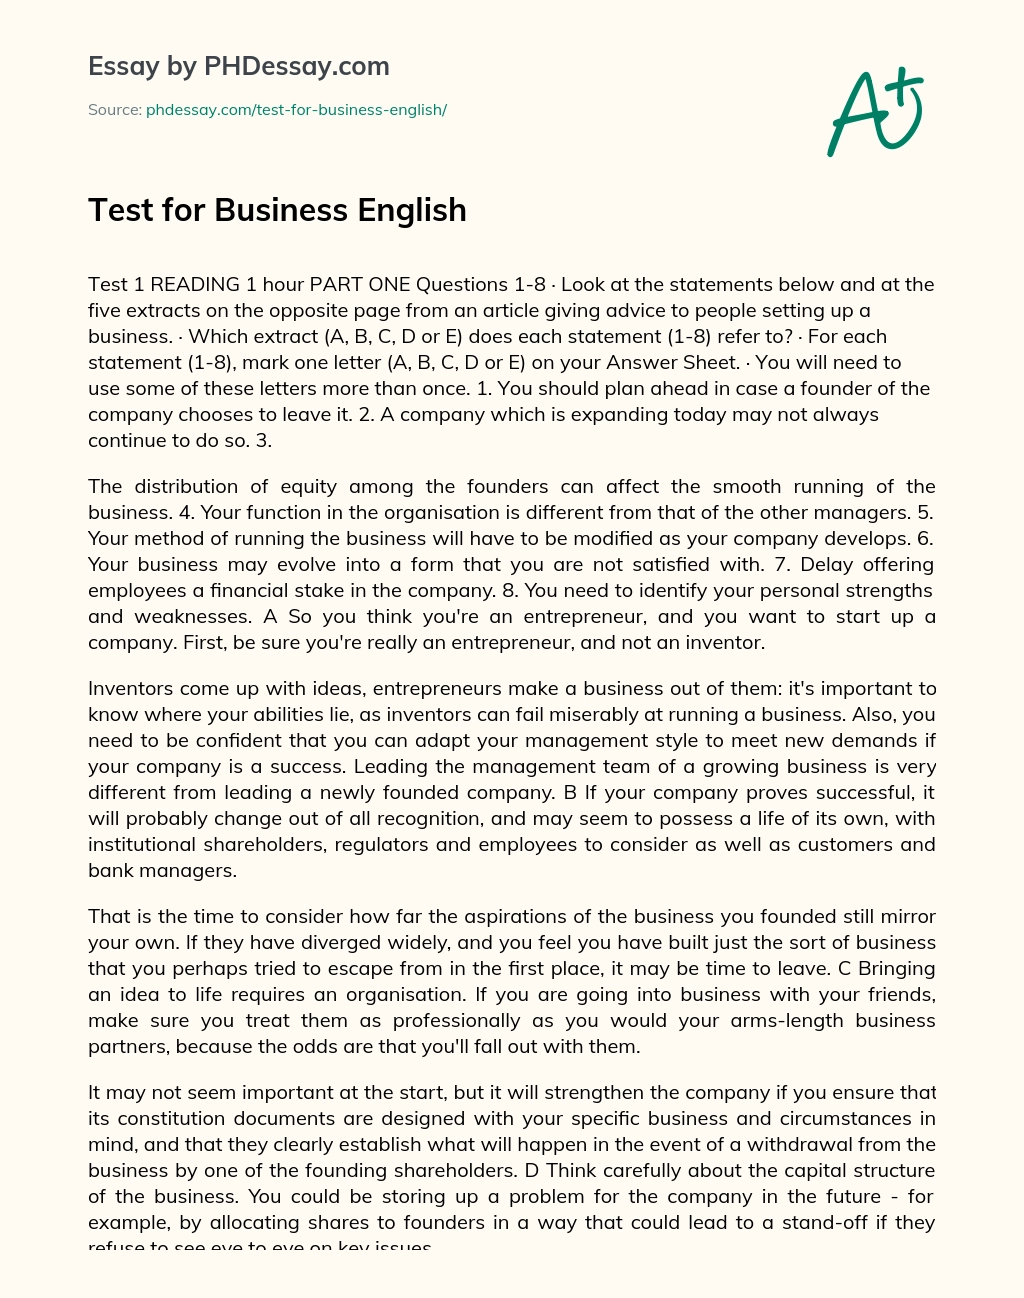 Test for Business English essay